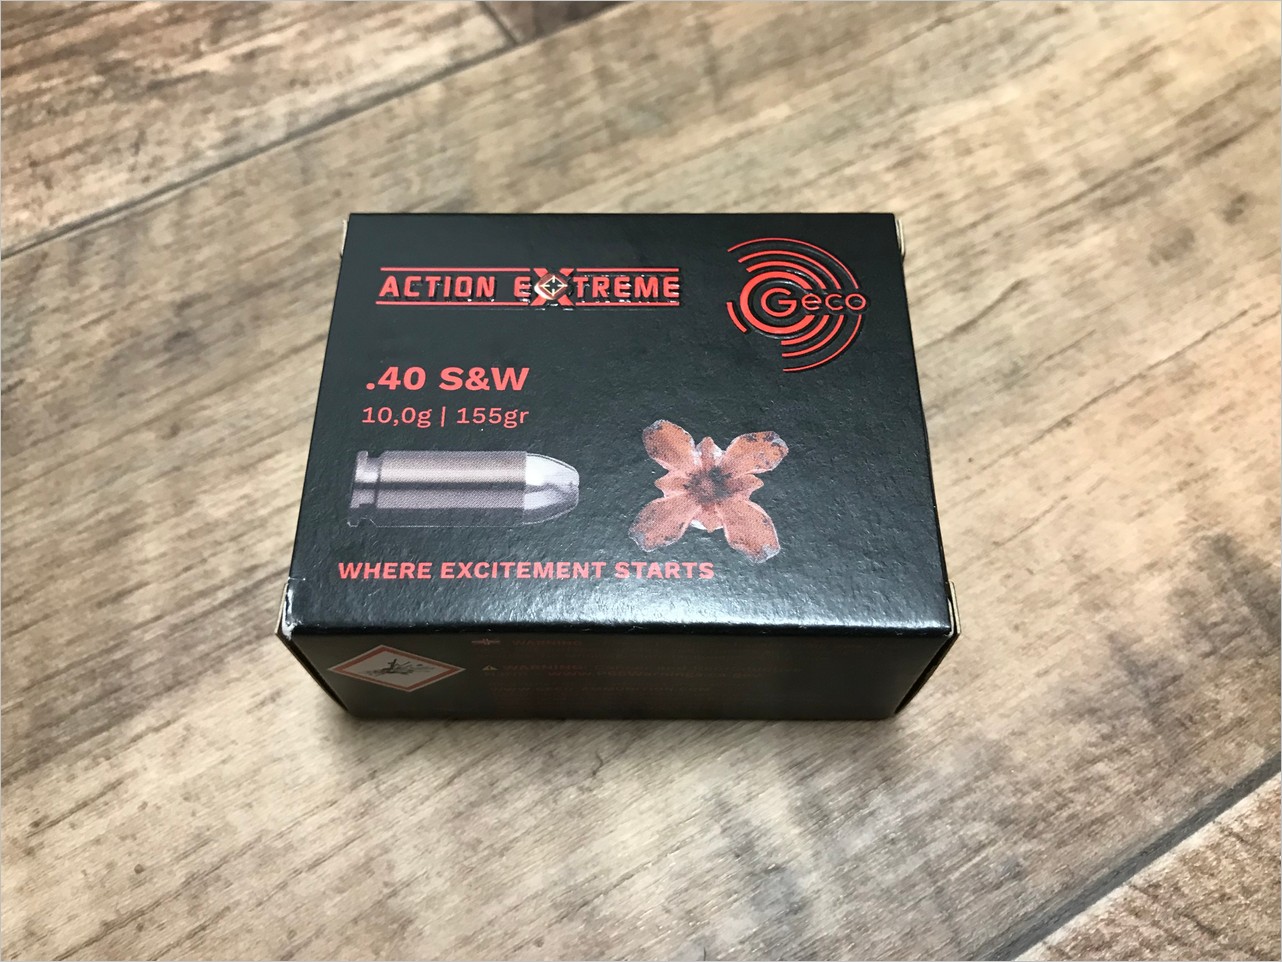 Geco .40 S&W Action Extreme 155GR